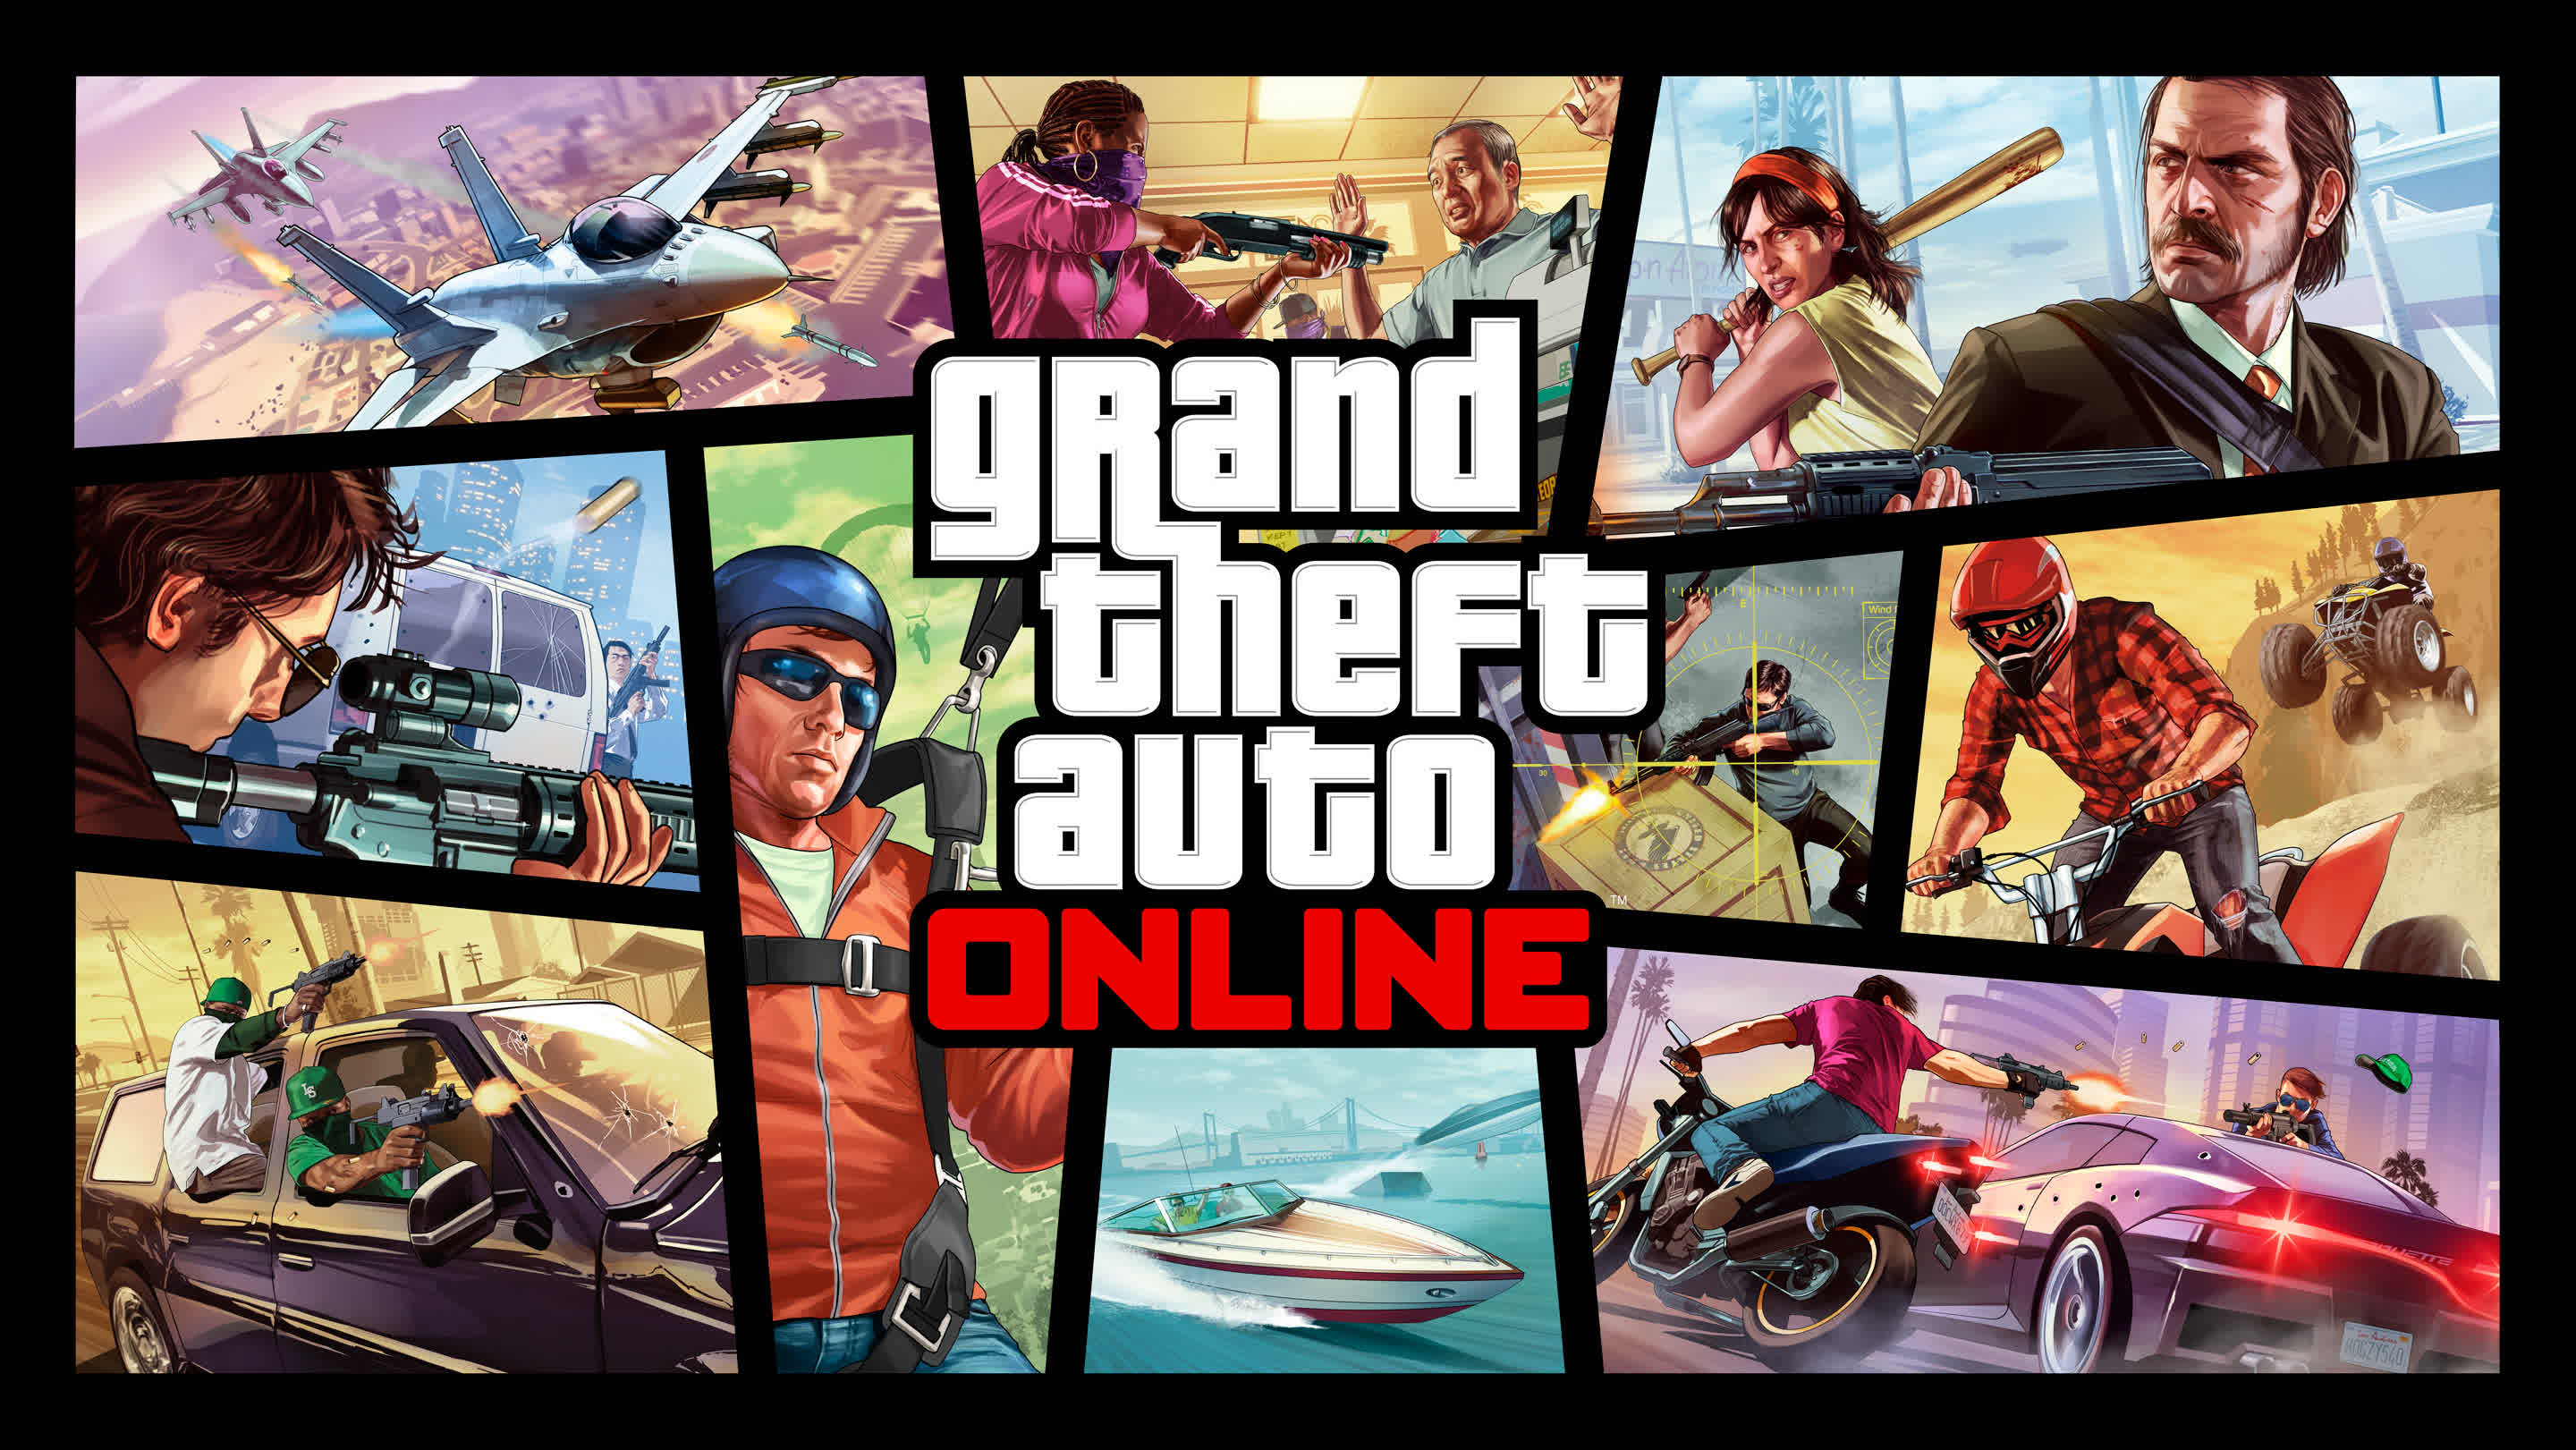 Rockstar will shut down GTA Online on PS3 and Xbox 360 later this year